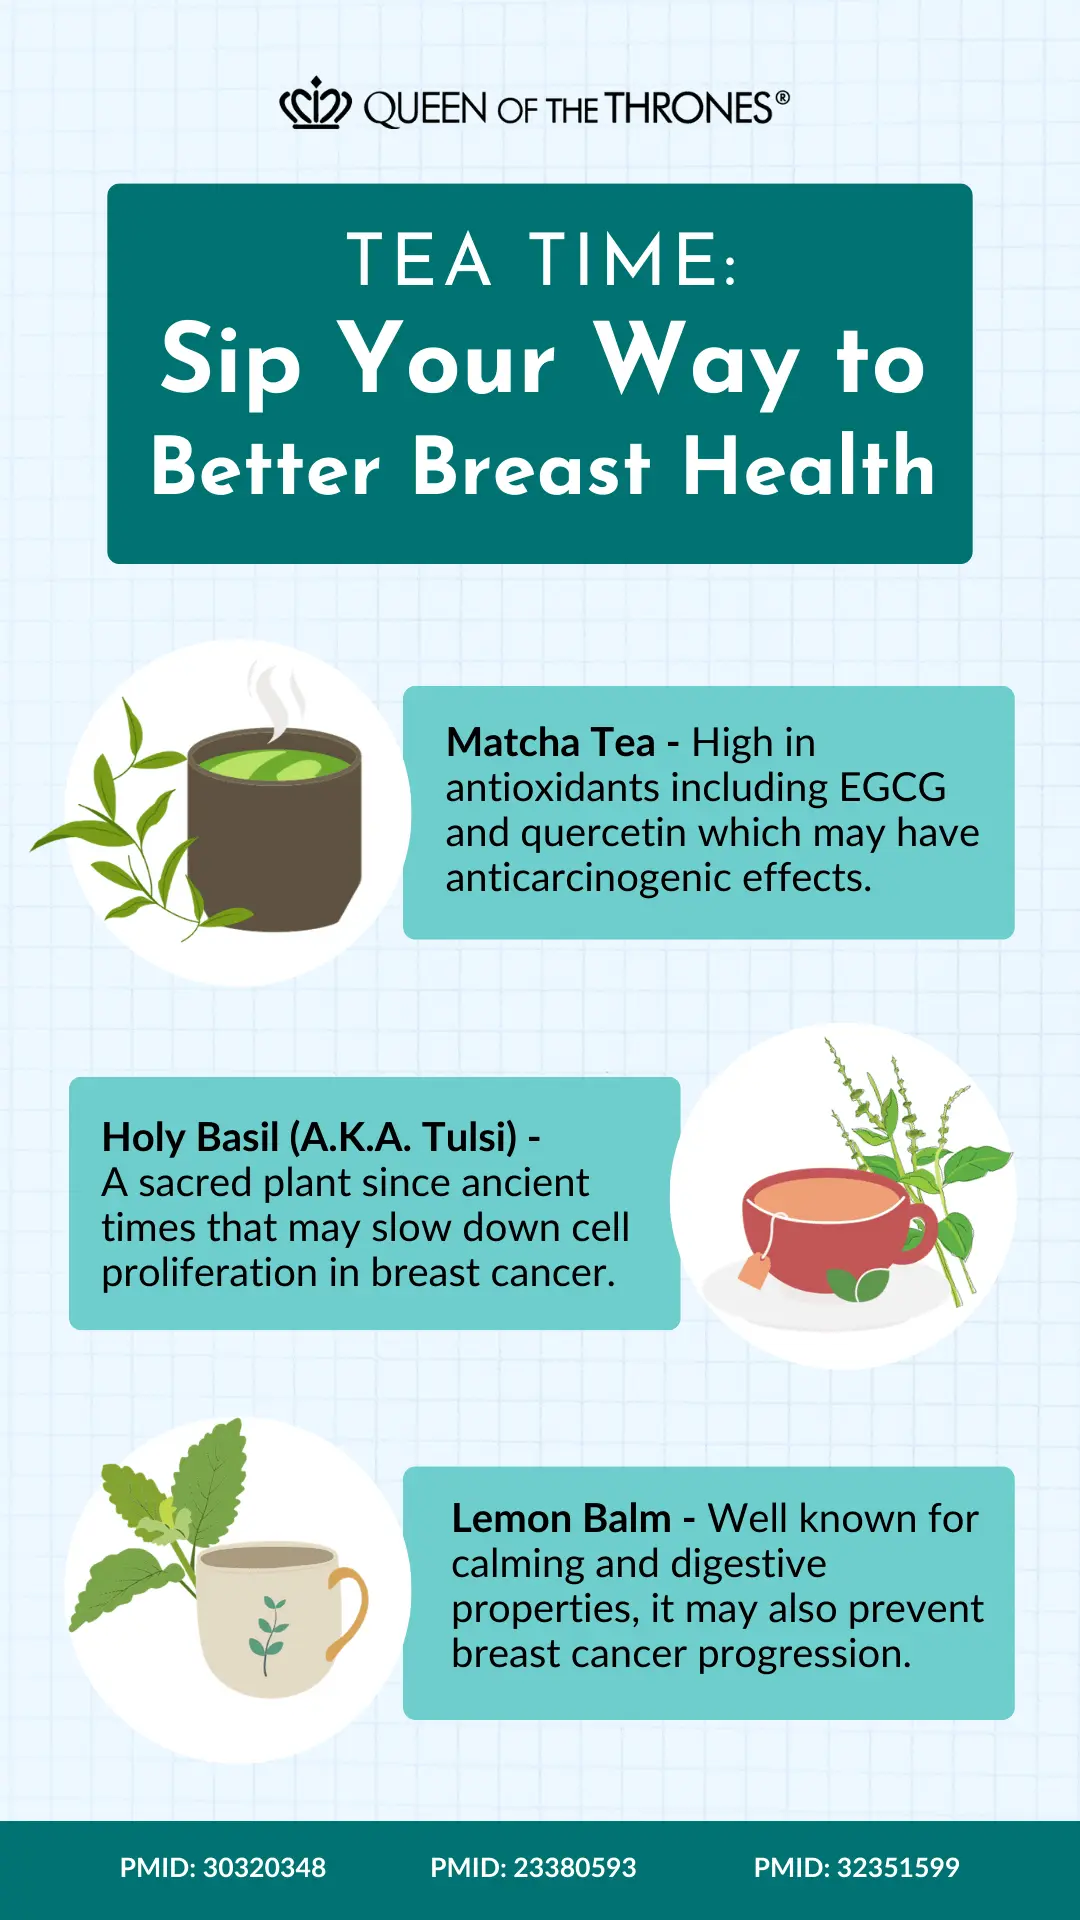 Breast health tea recipes by Queen of the Thrones